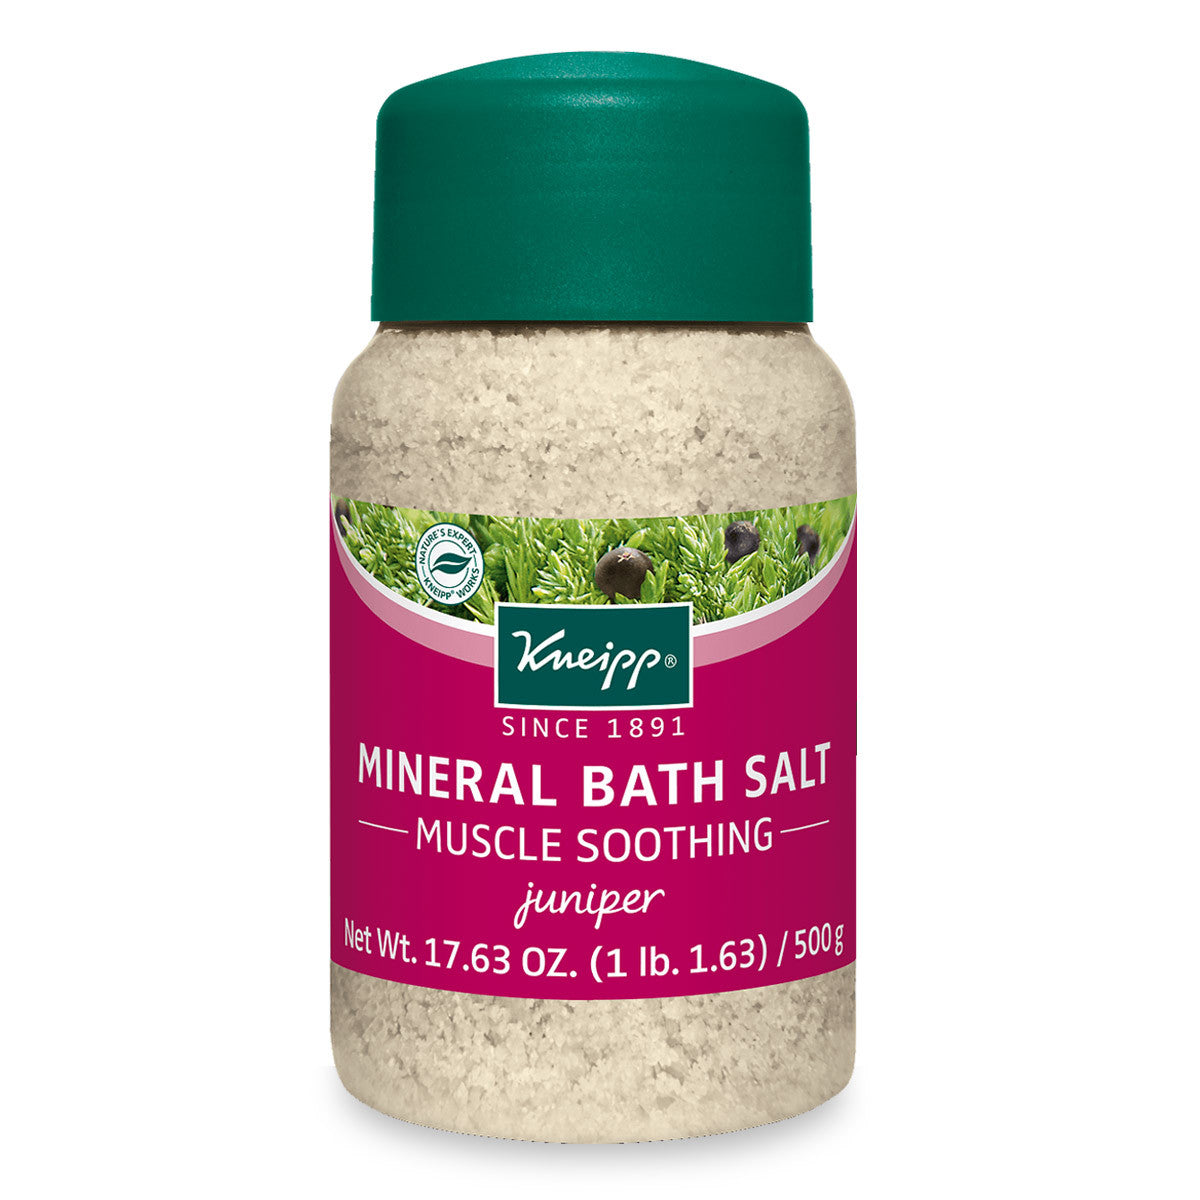 Primary image of Juniper Muscle Soothing Bath Salts